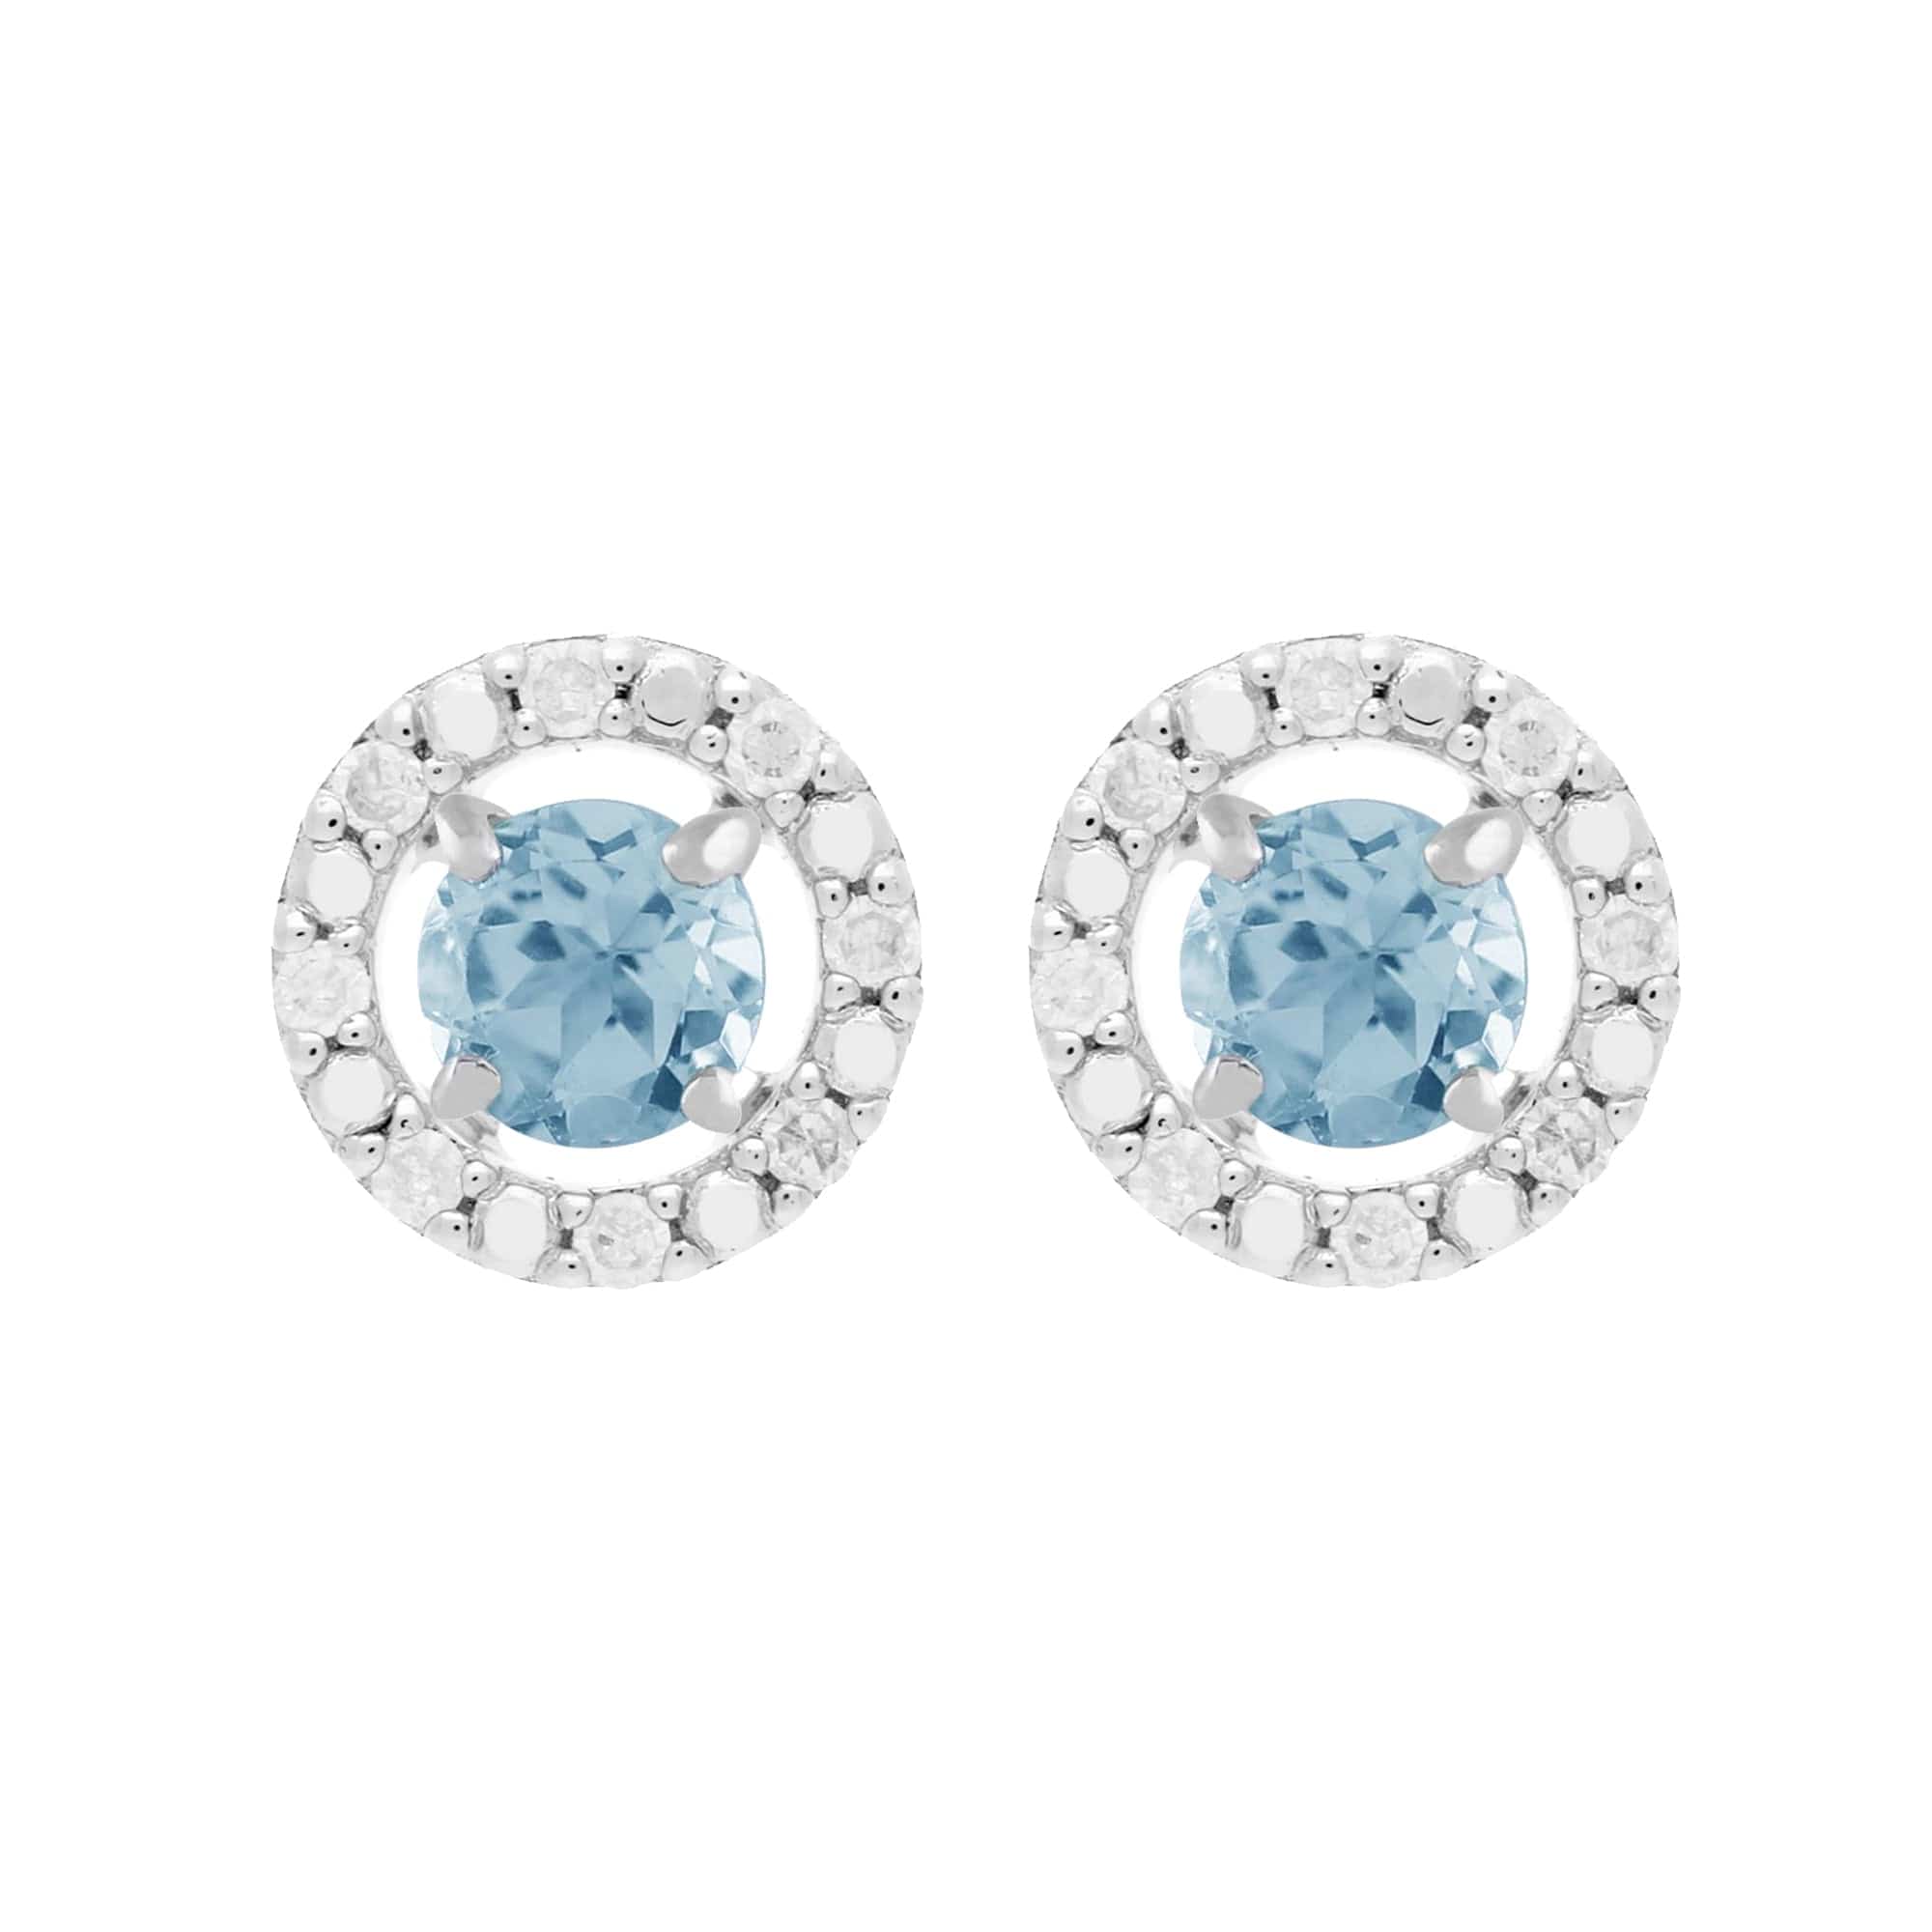 11623-162E0228019 Classic Round Blue Topaz Stud Earrings with Detachable Diamond Round Ear Jacket in 9ct White Gold 1